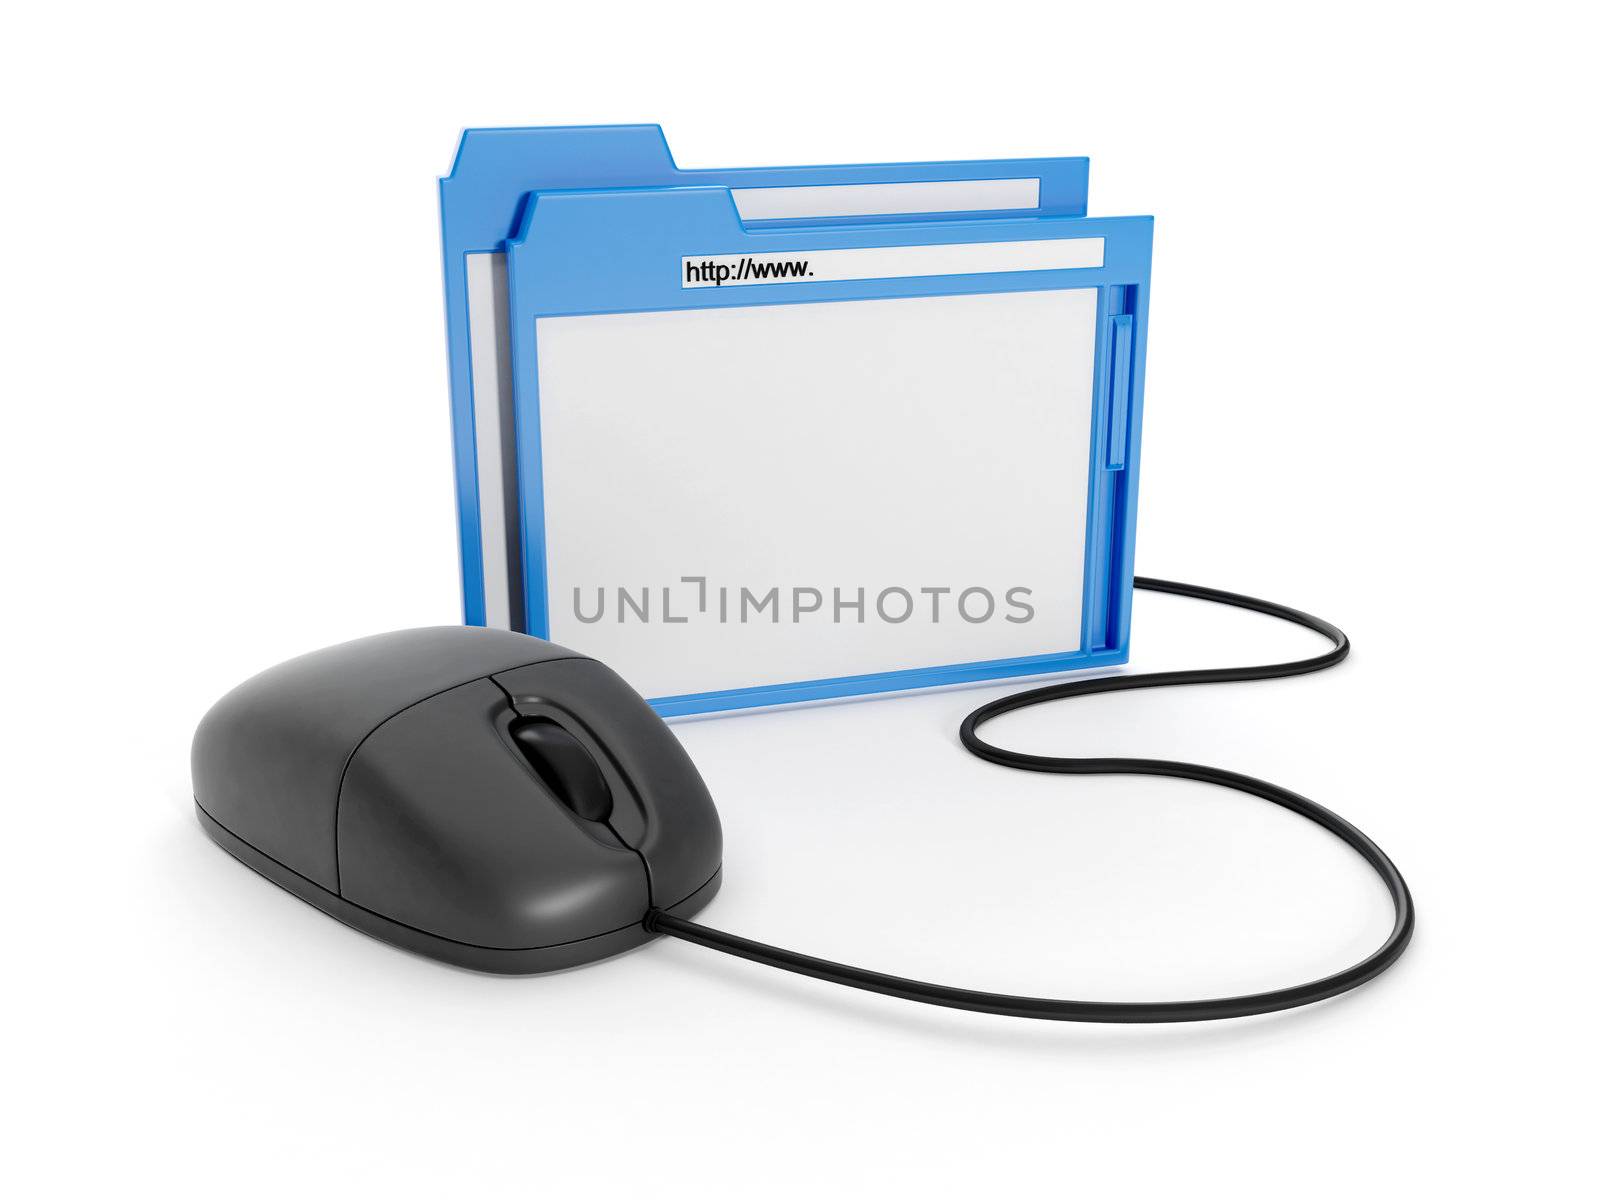 3d illustration: Browser window and the computer mouse on white background